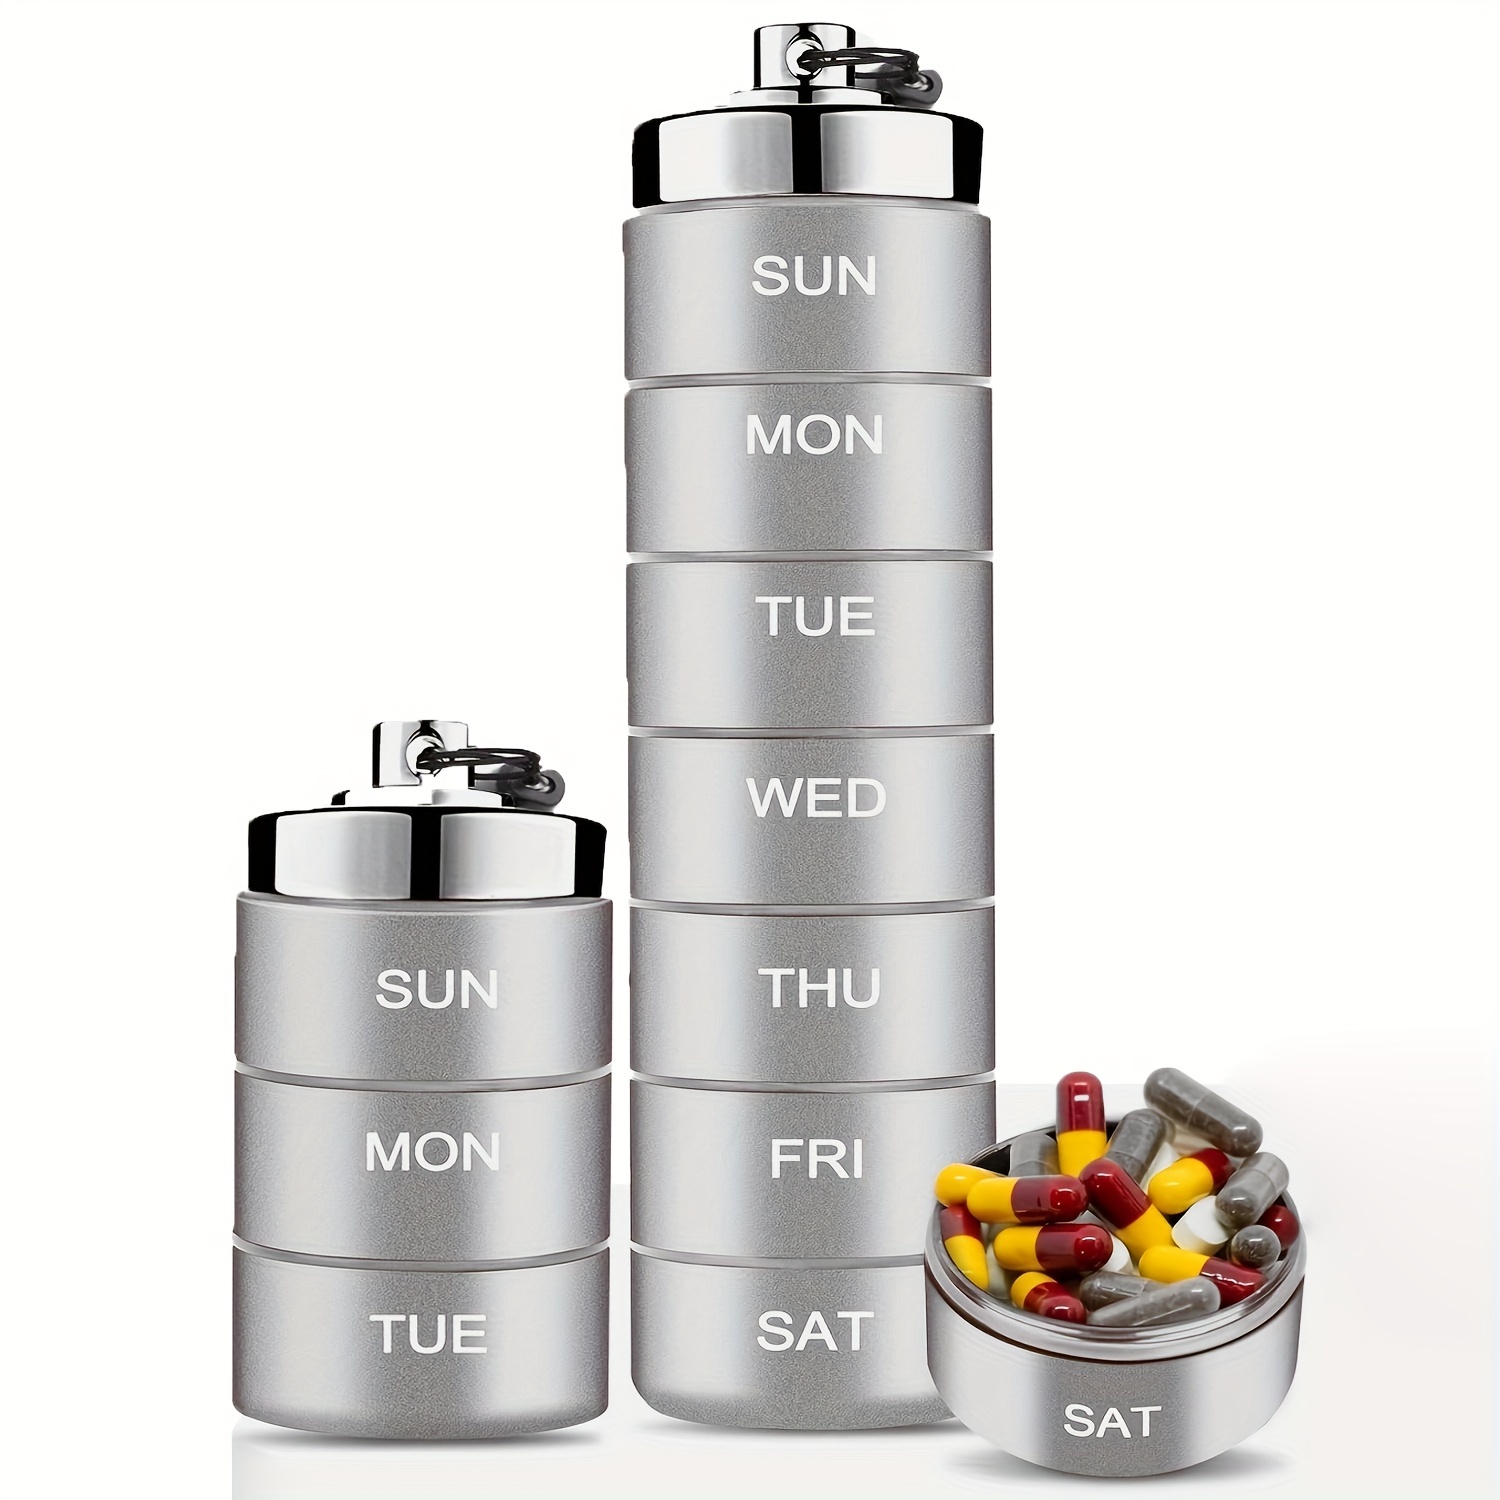 7-Grid Portable Metal Aluminum Alloy Travel Pill Box - Keep Your * &  Supplements Safely Stored & Organized!